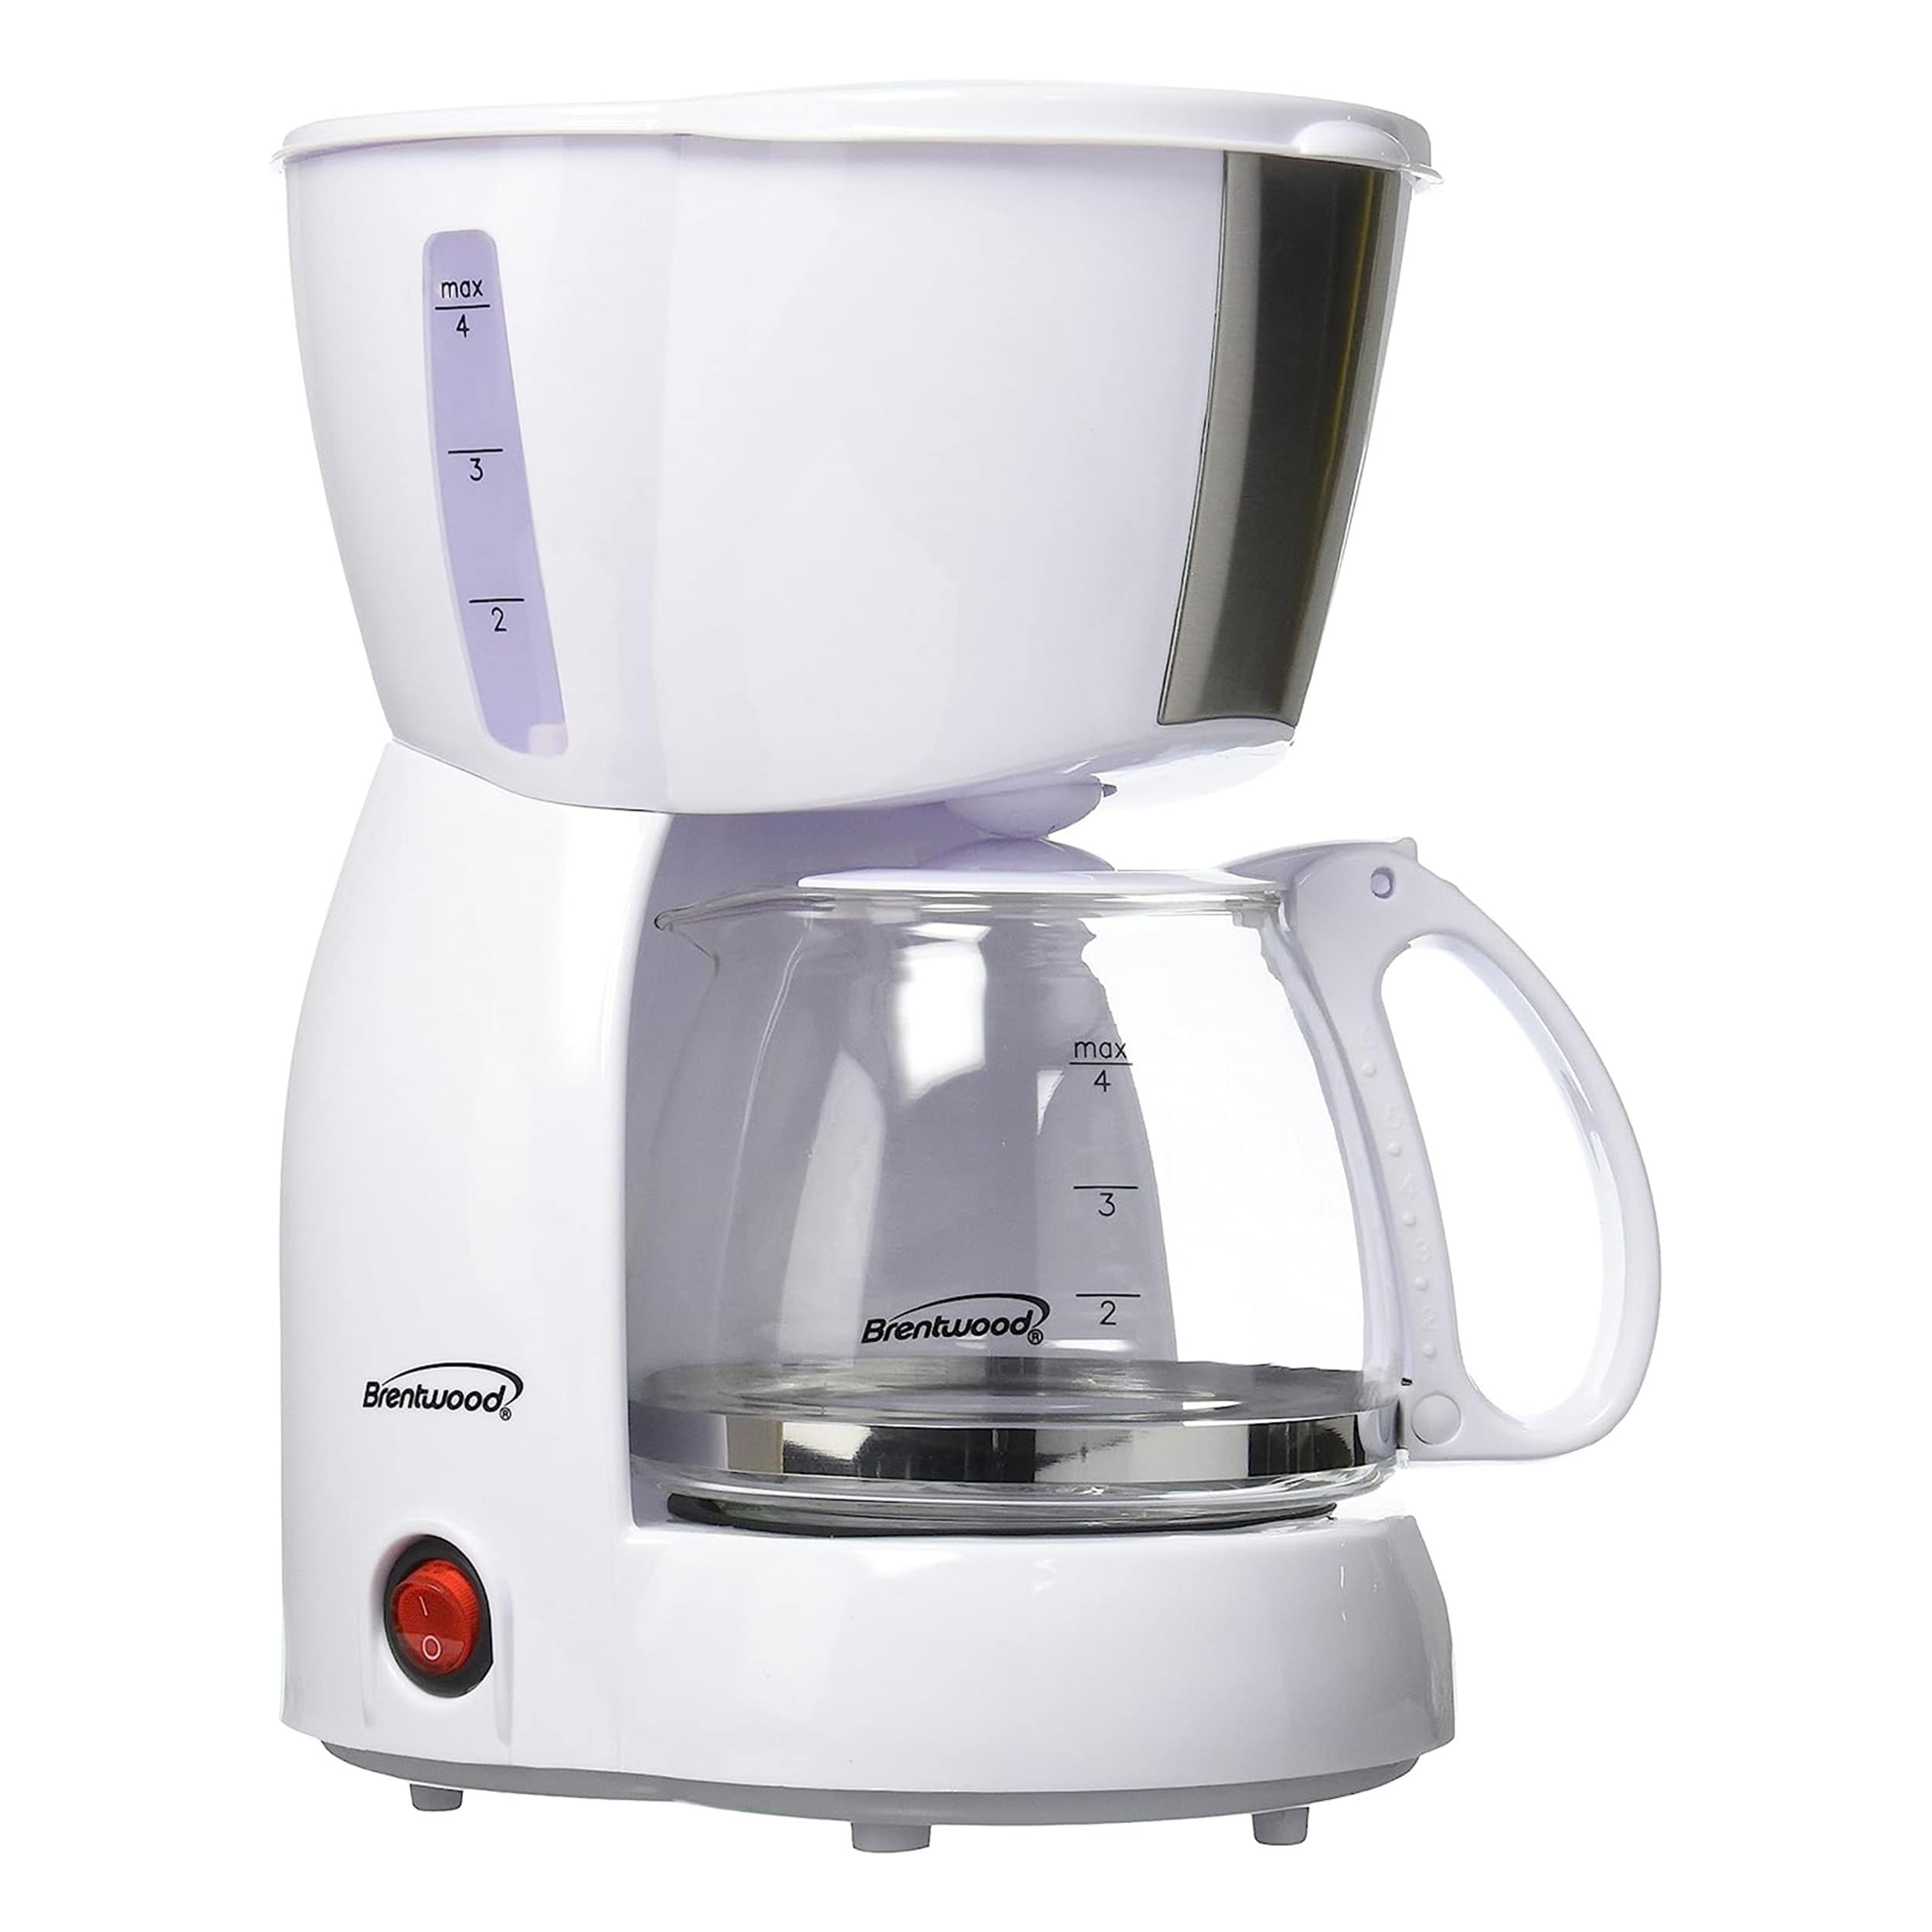 4 Cup Automatic Drip Coffee Maker One Button Control - Bed Bath